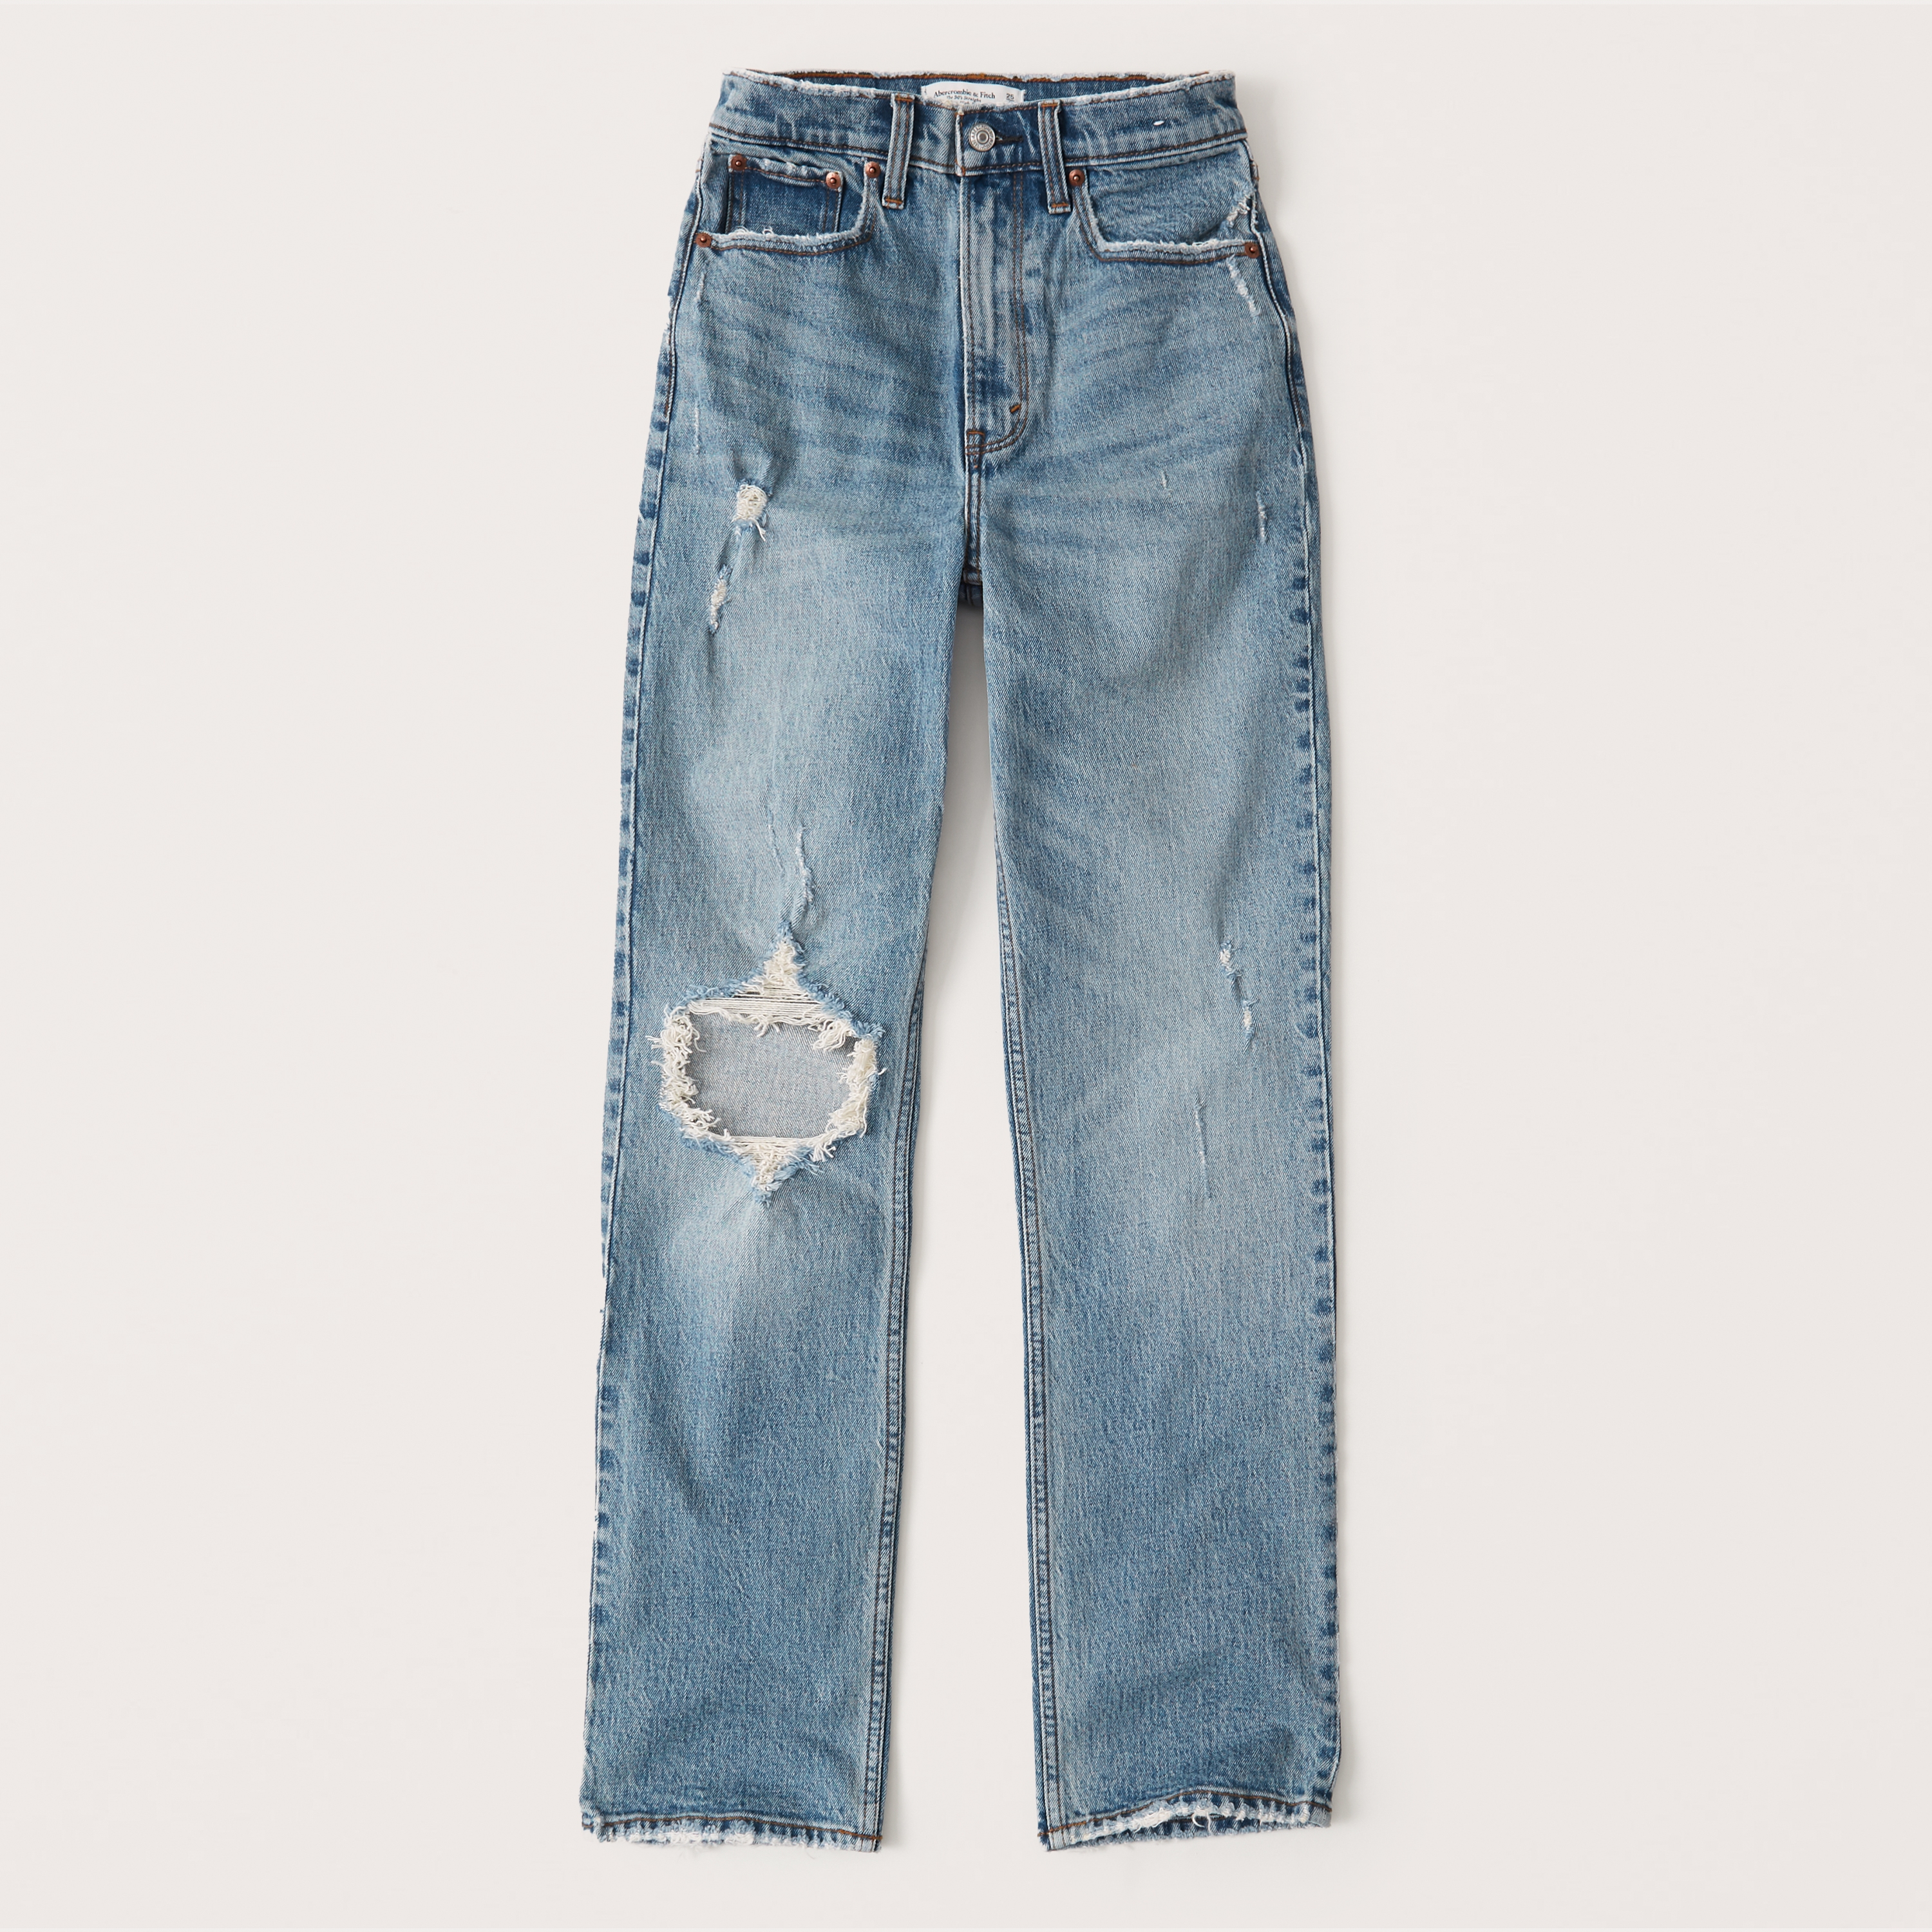 90s high rise jeans